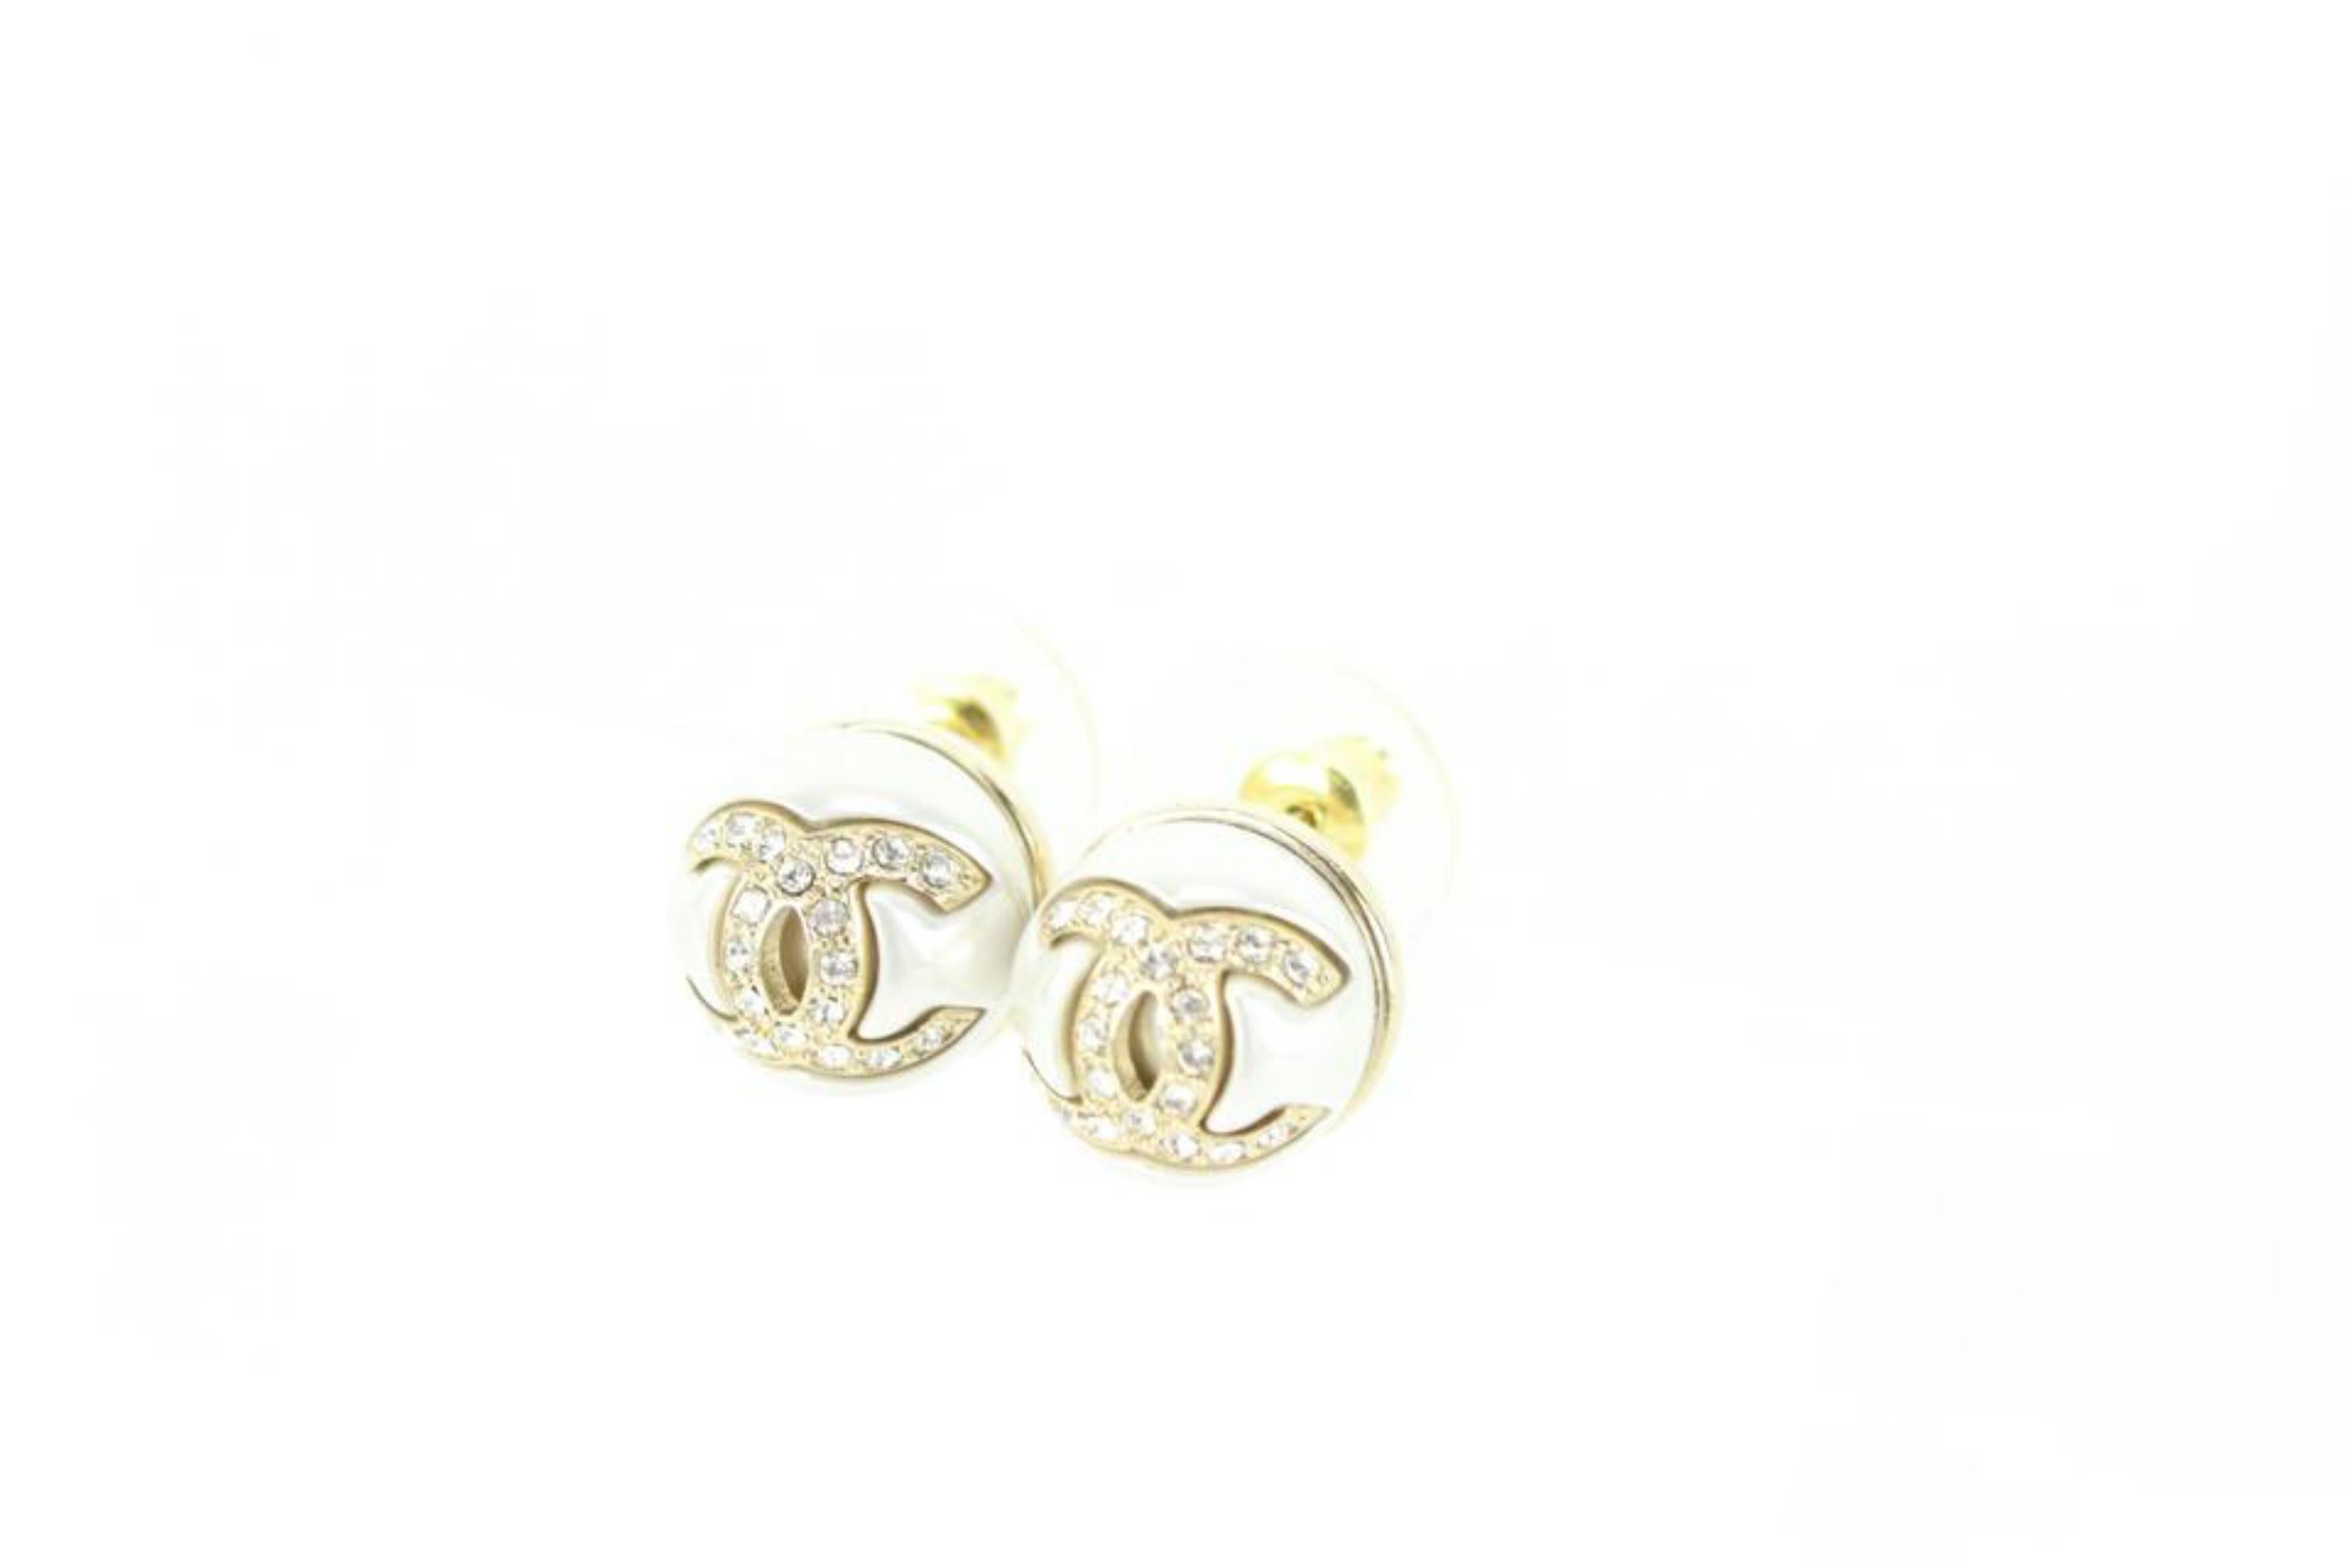 Chanel 22S Gold x Pearl CC Crystal Earrings 26cz510s – Bagriculture